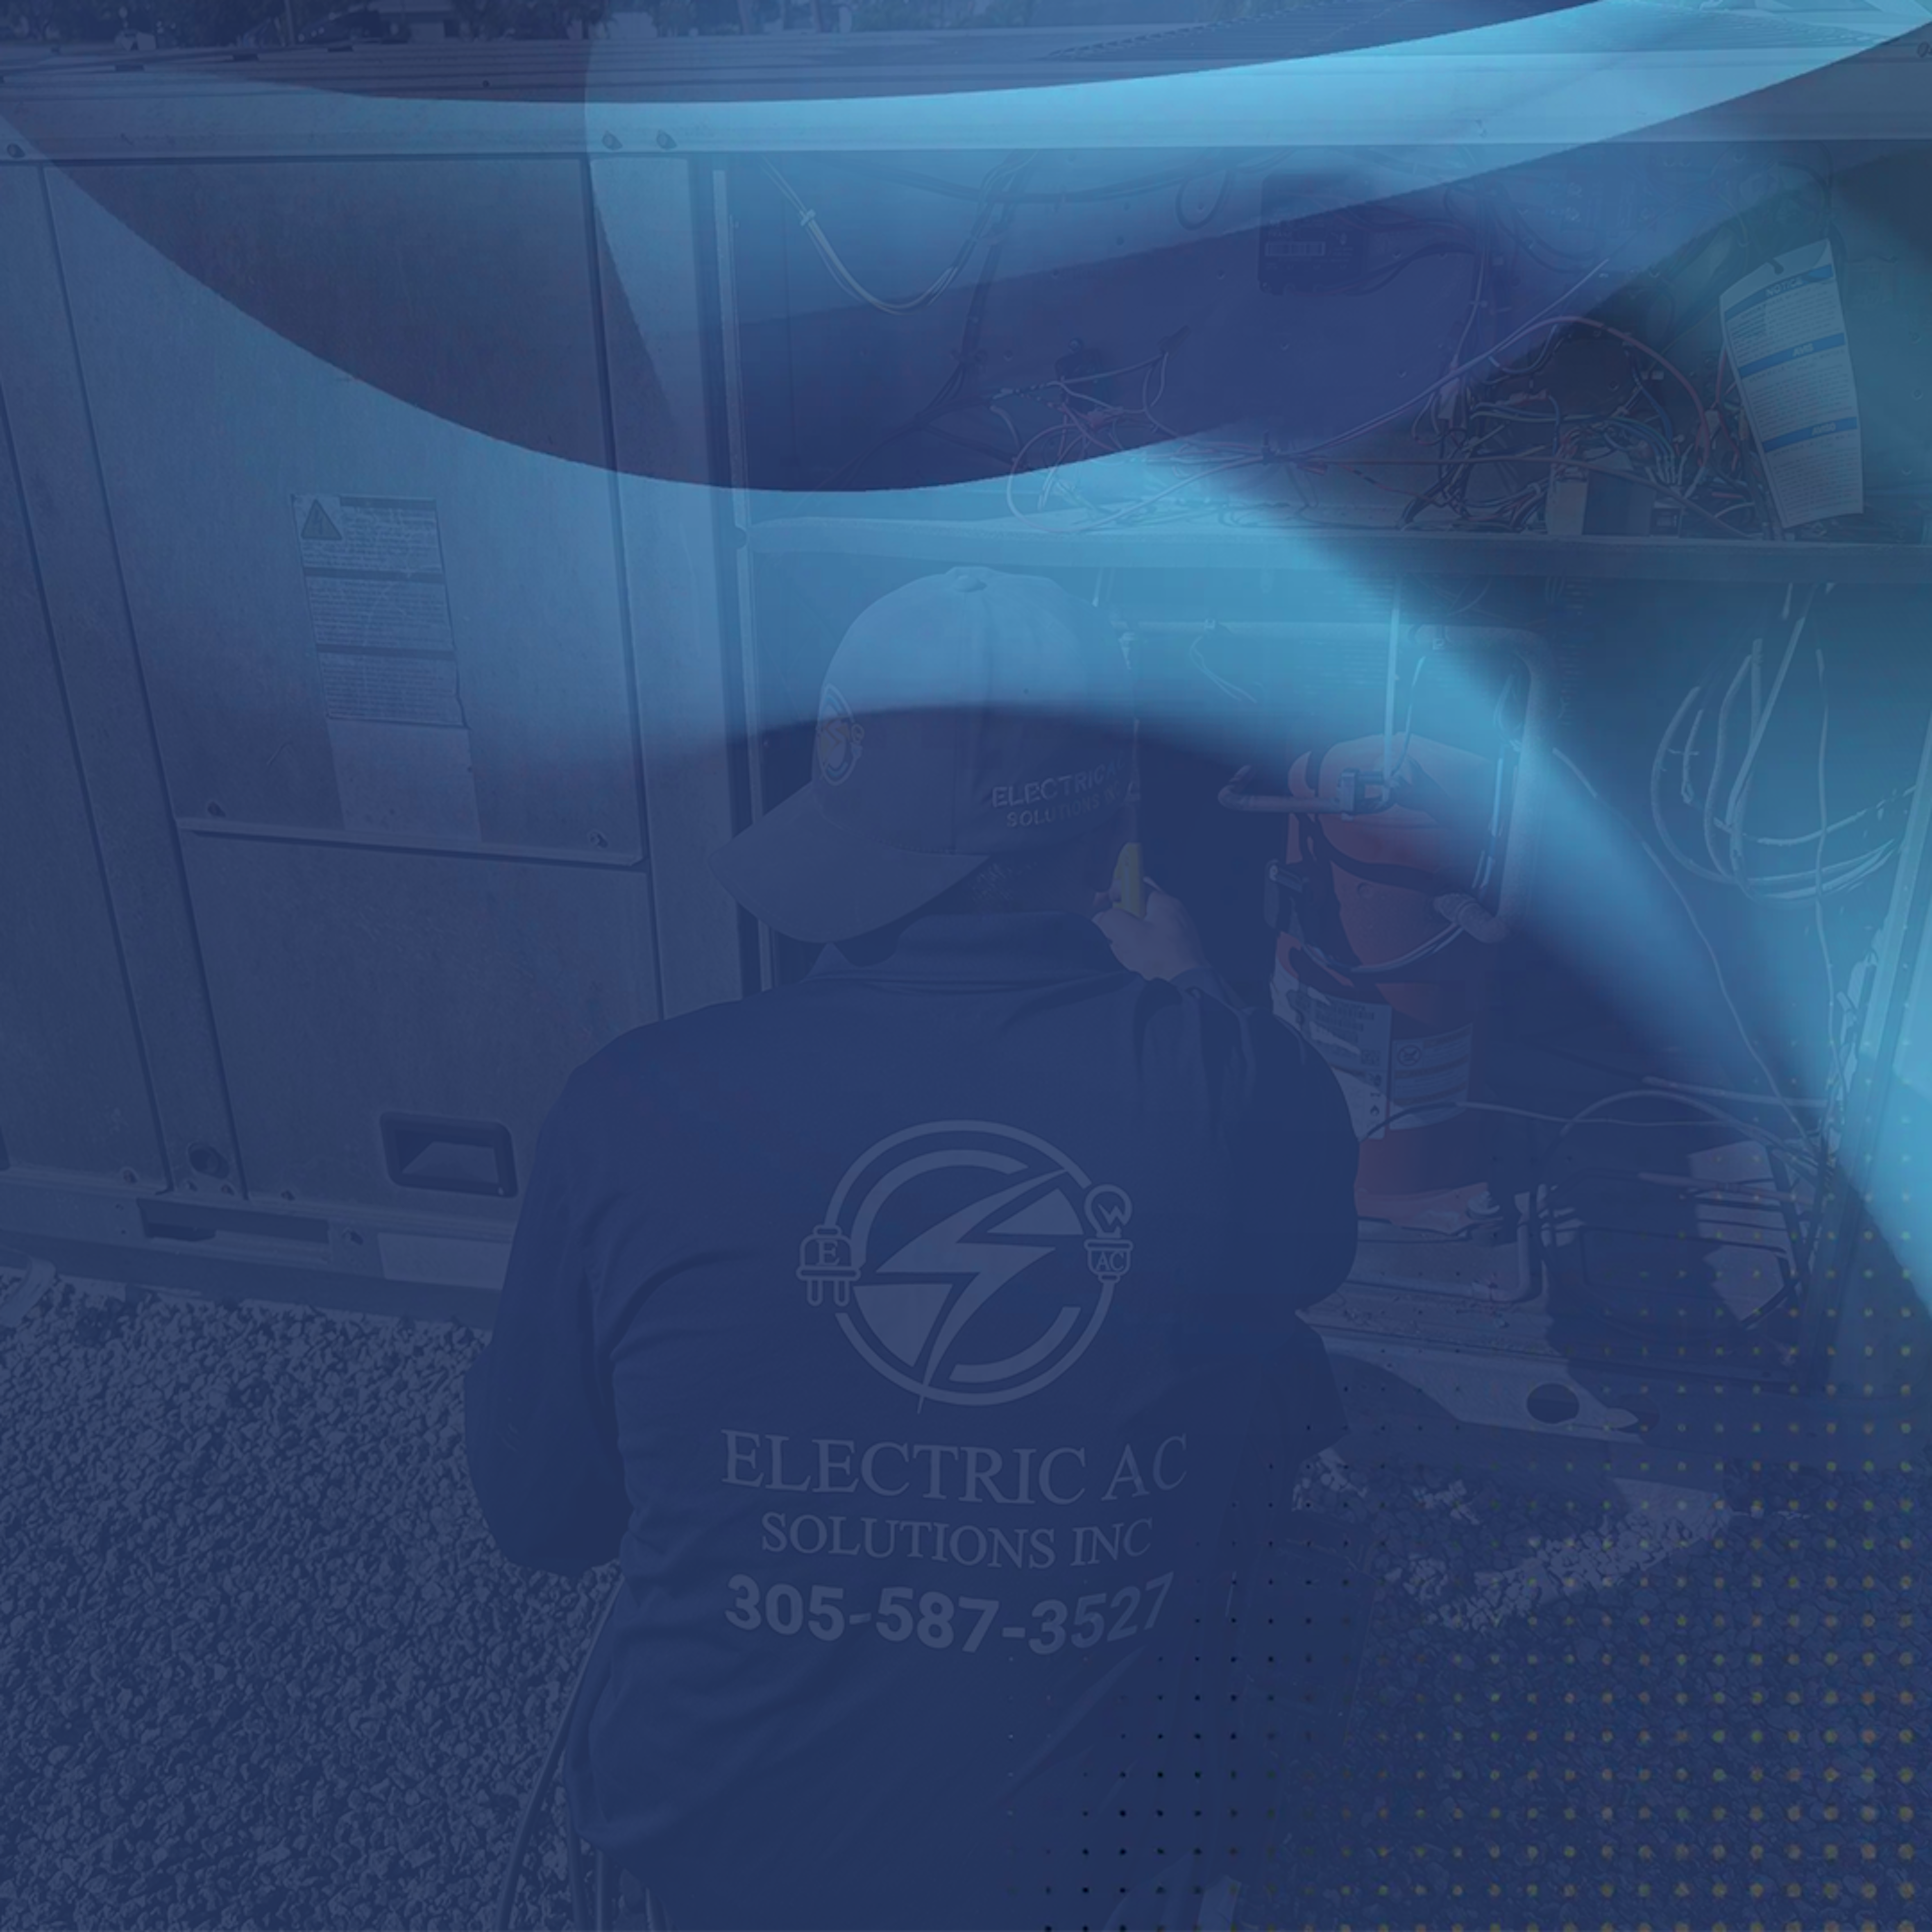 Electric AC Solutions are rated 5 stars and have been in business for over a decade. Contact us today for electrician or HVAC services! We are licensed and insured.